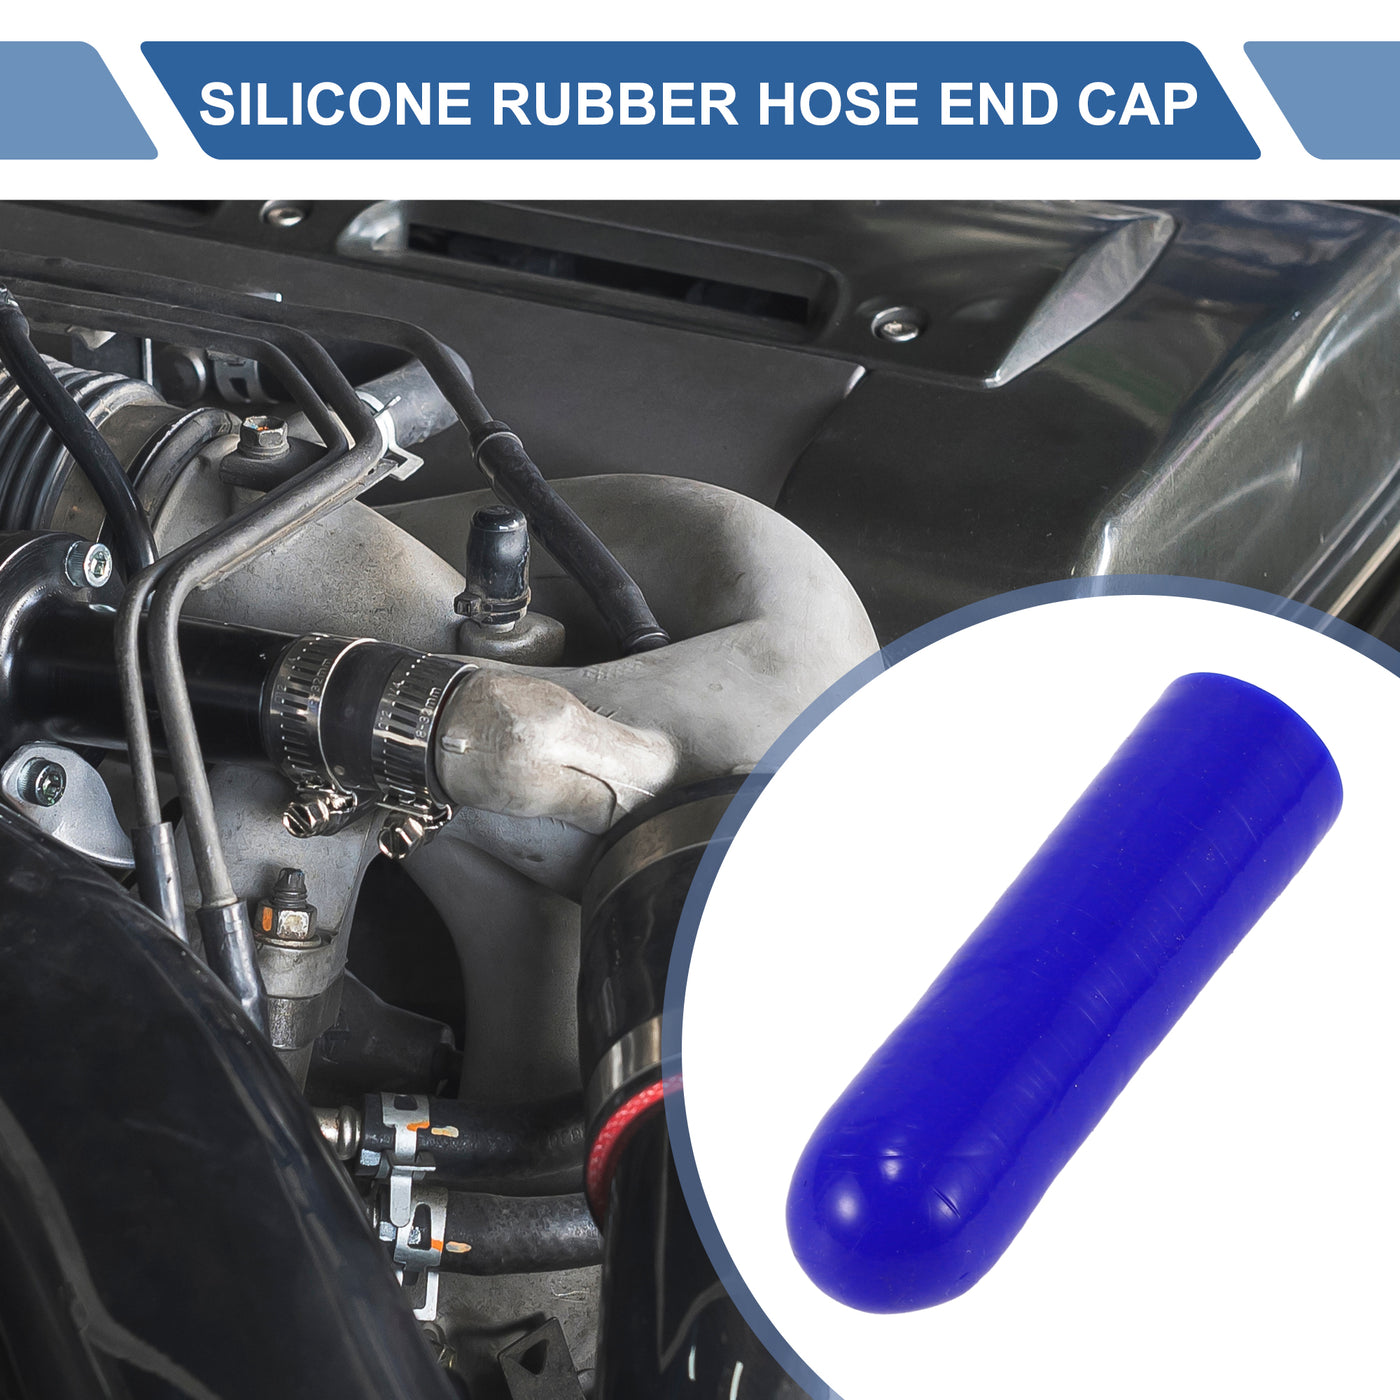 X AUTOHAUX 1 Pcs 60mm Length 12mm/0.47" ID Blue Car Silicone Rubber Hose End Cap with Clamp Silicone Reinforced Blanking Cap for Bypass Tube Universal